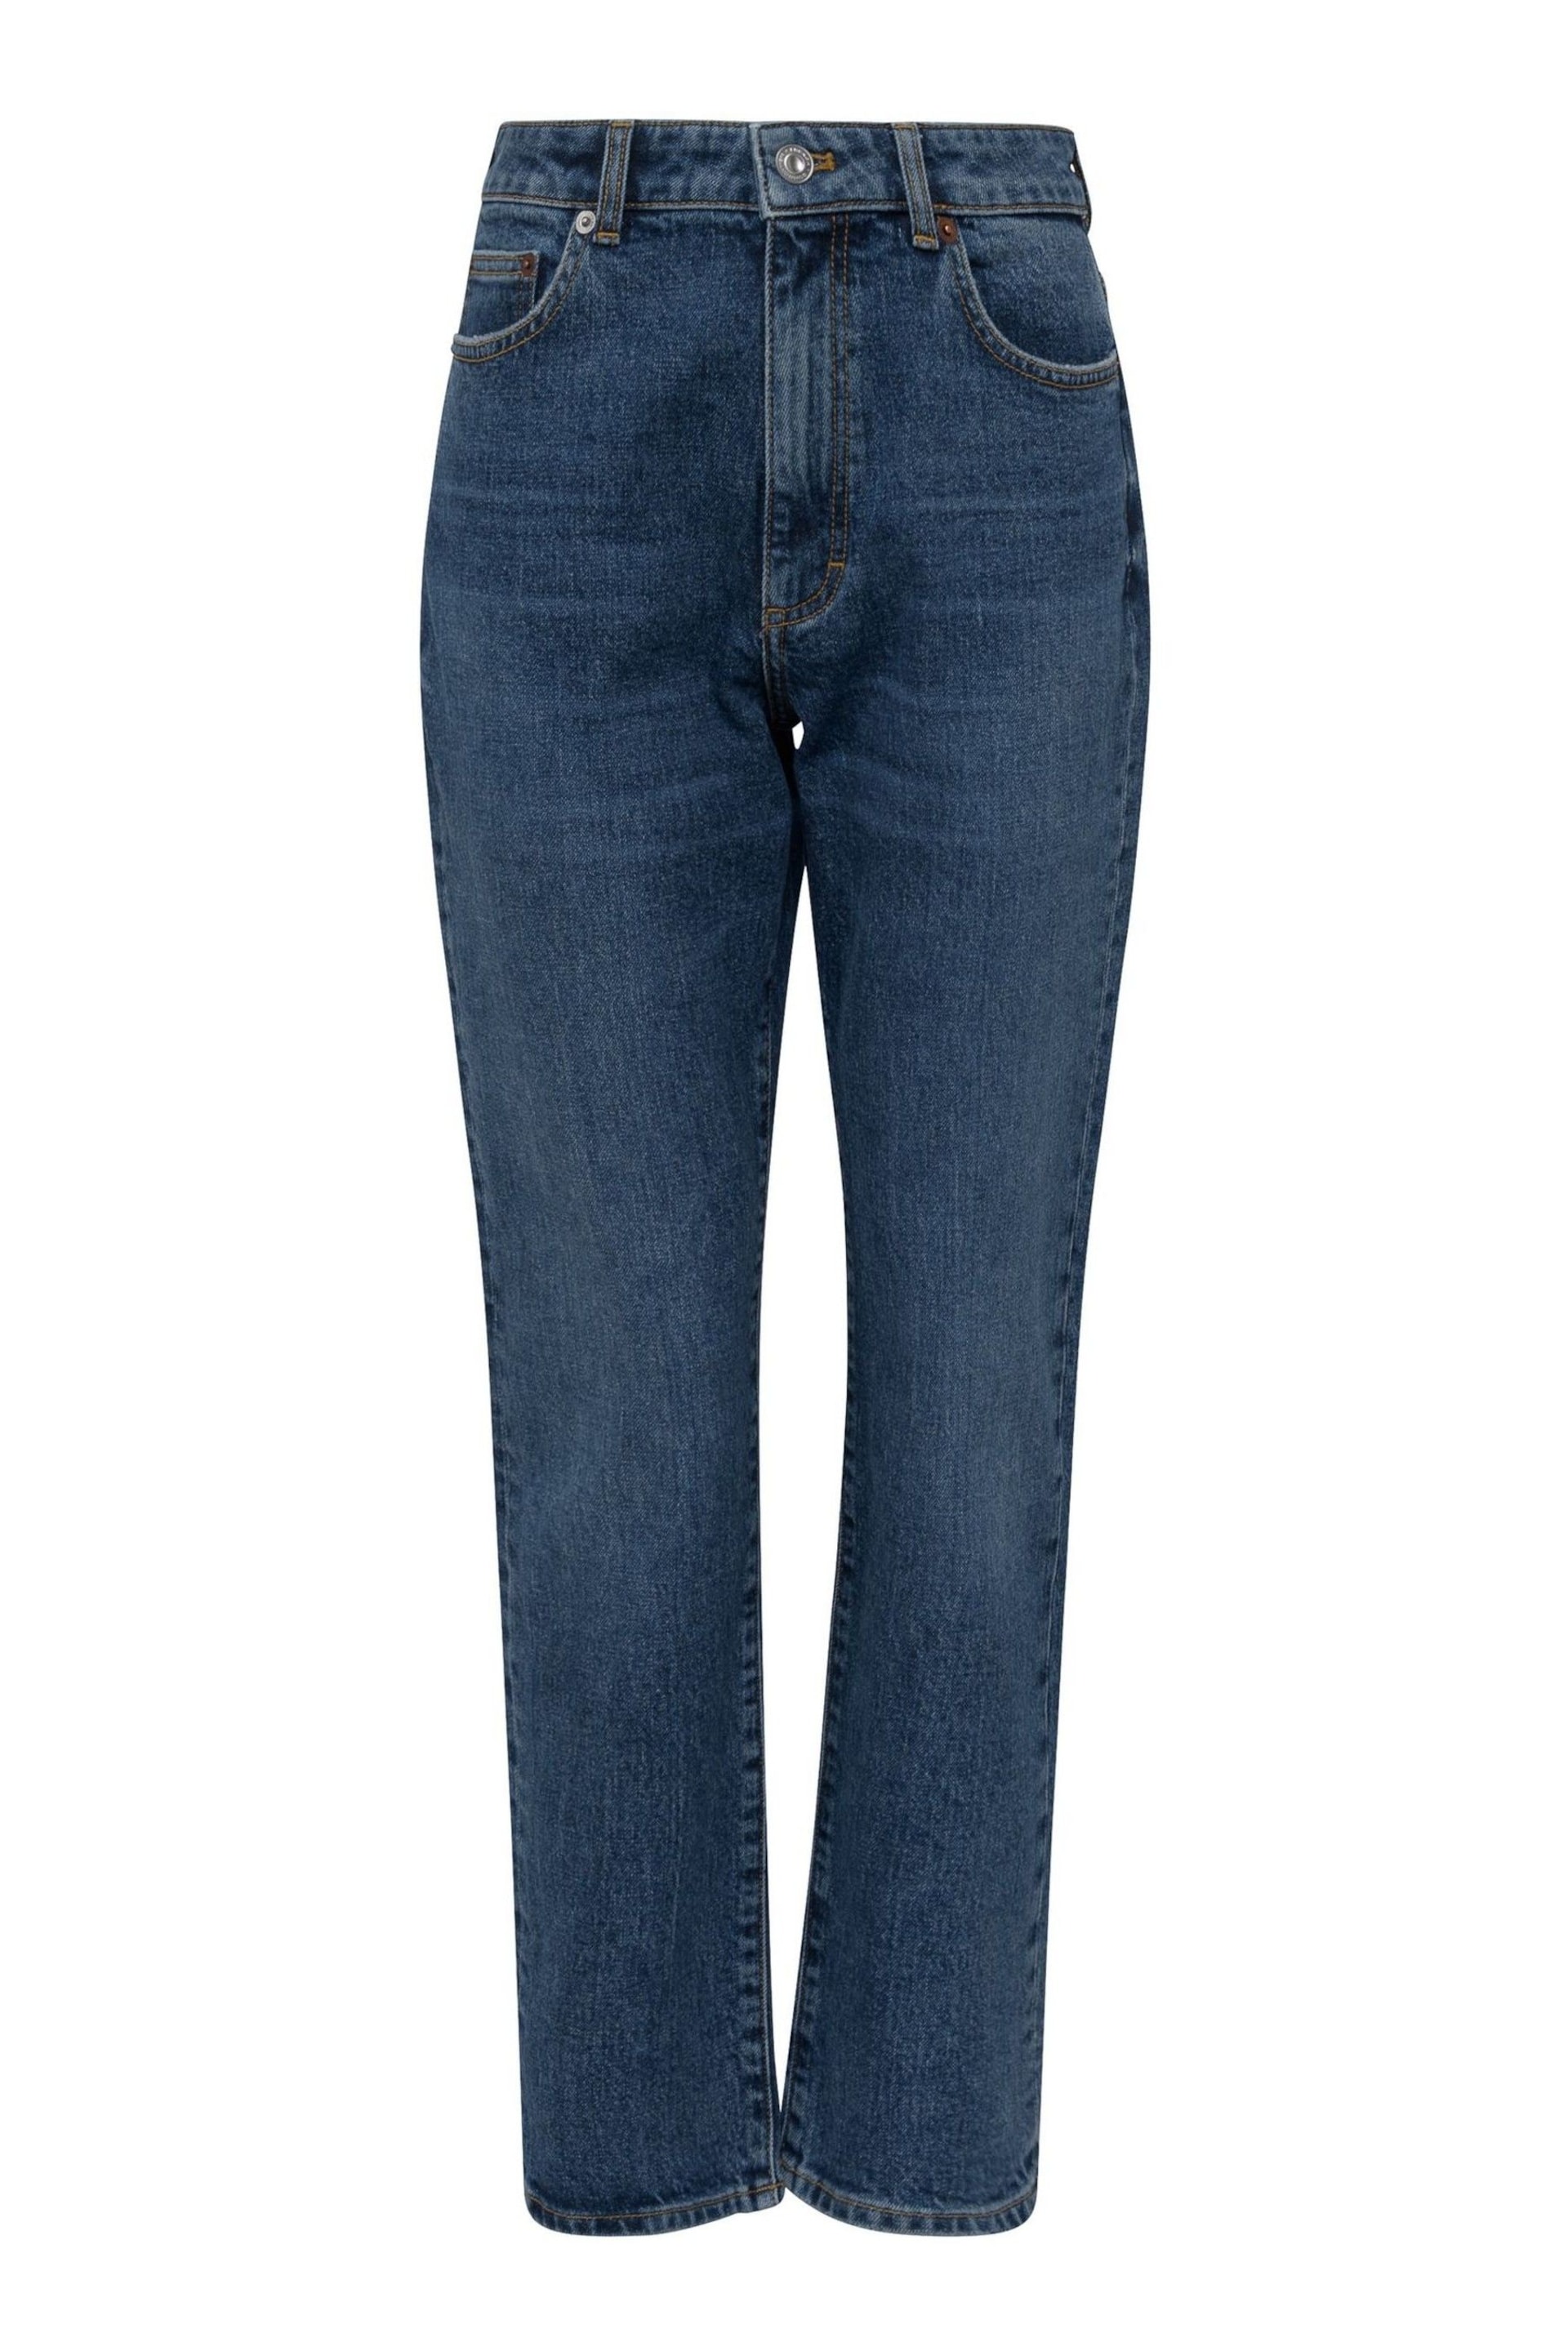 French Connection Comfort Stretch High Rise Straight Leg Jeans - Image 2 of 3